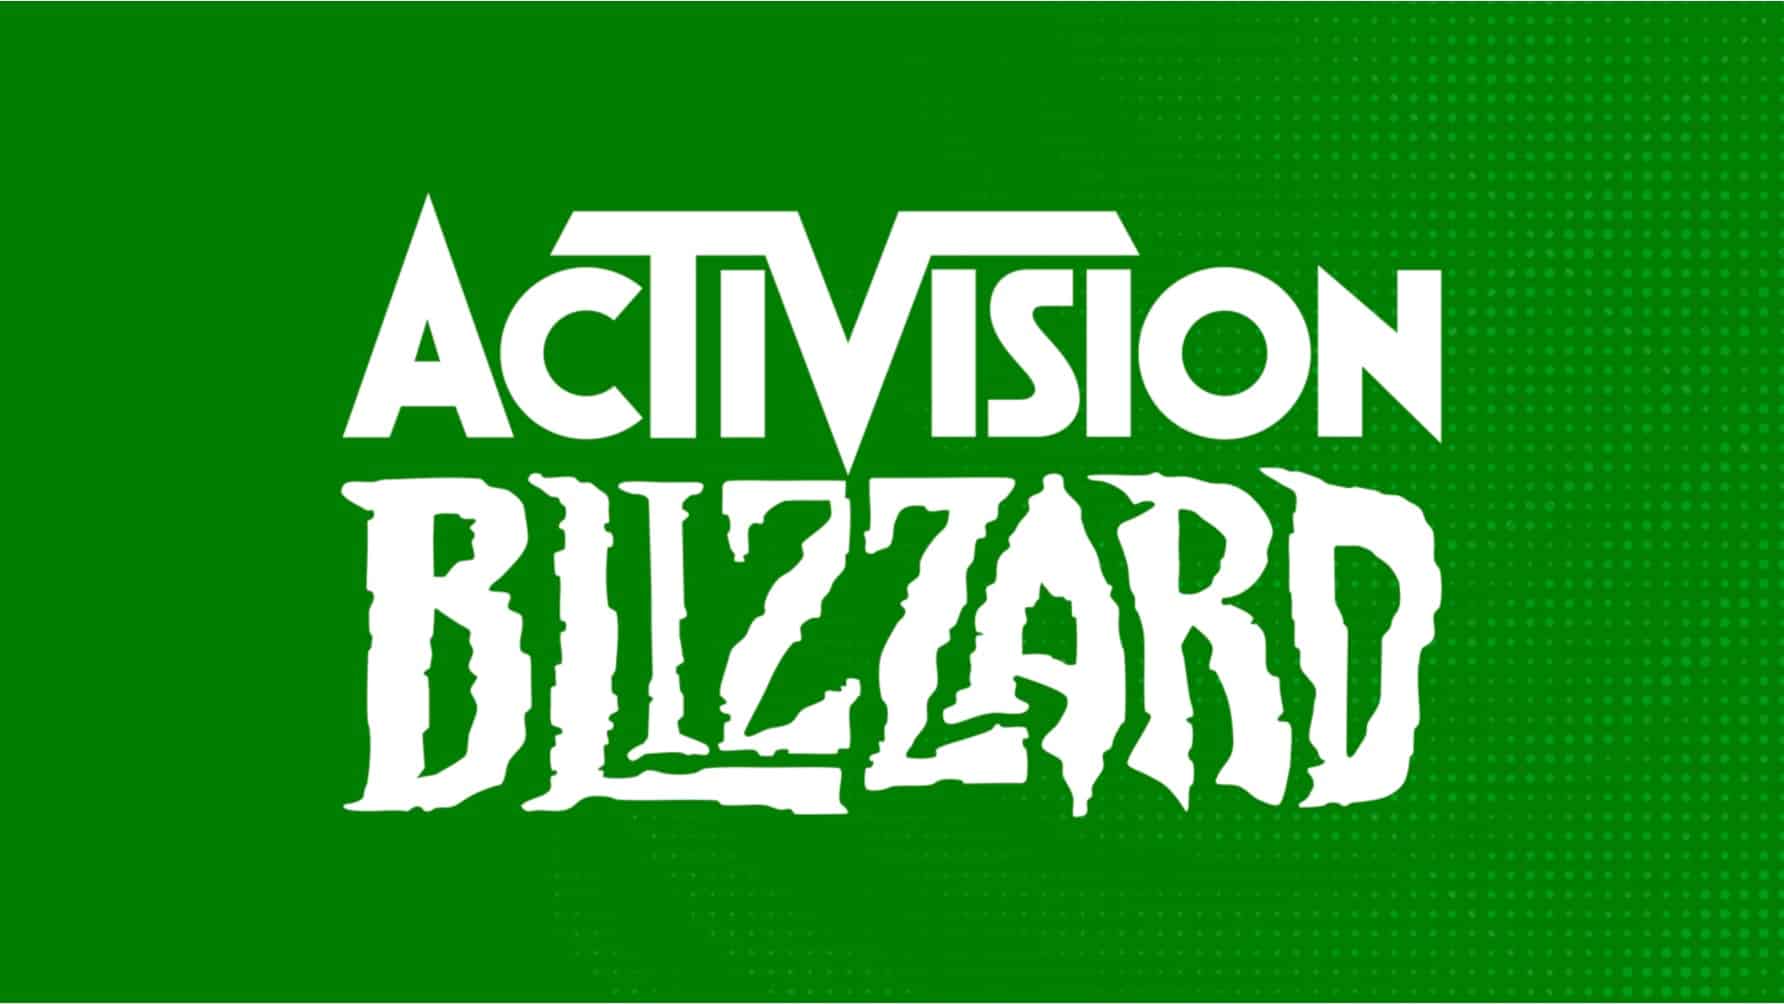 Analyst believes Microsoft will have difficulties with regulators when buying Activision